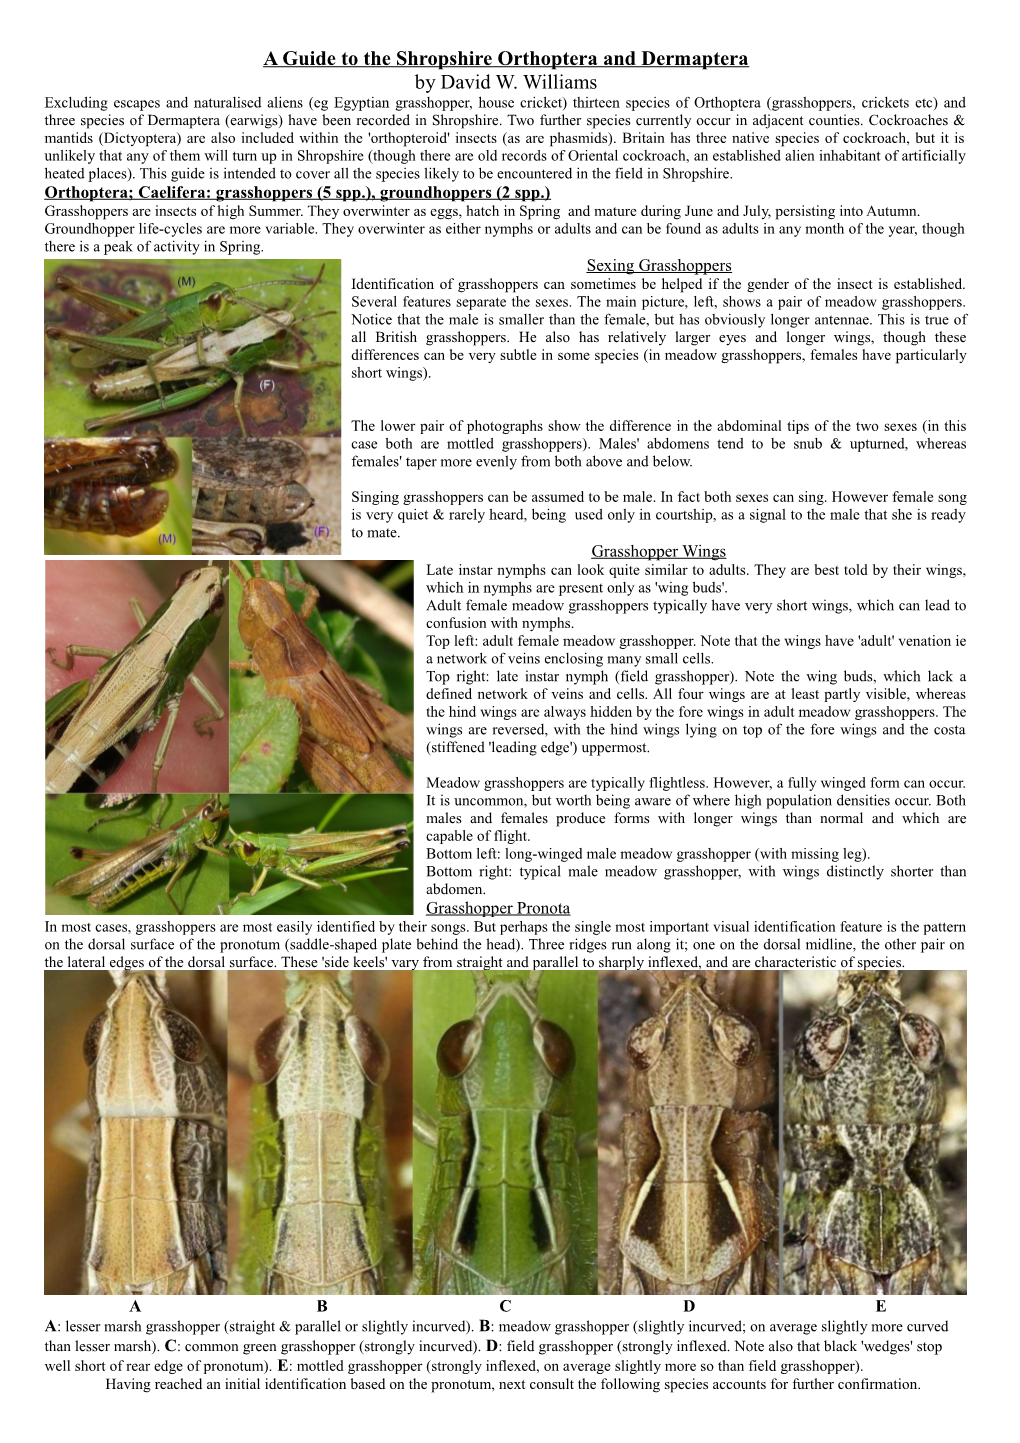 A Guide to the Shropshire Orthoptera and Dermaptera by David W. Williams